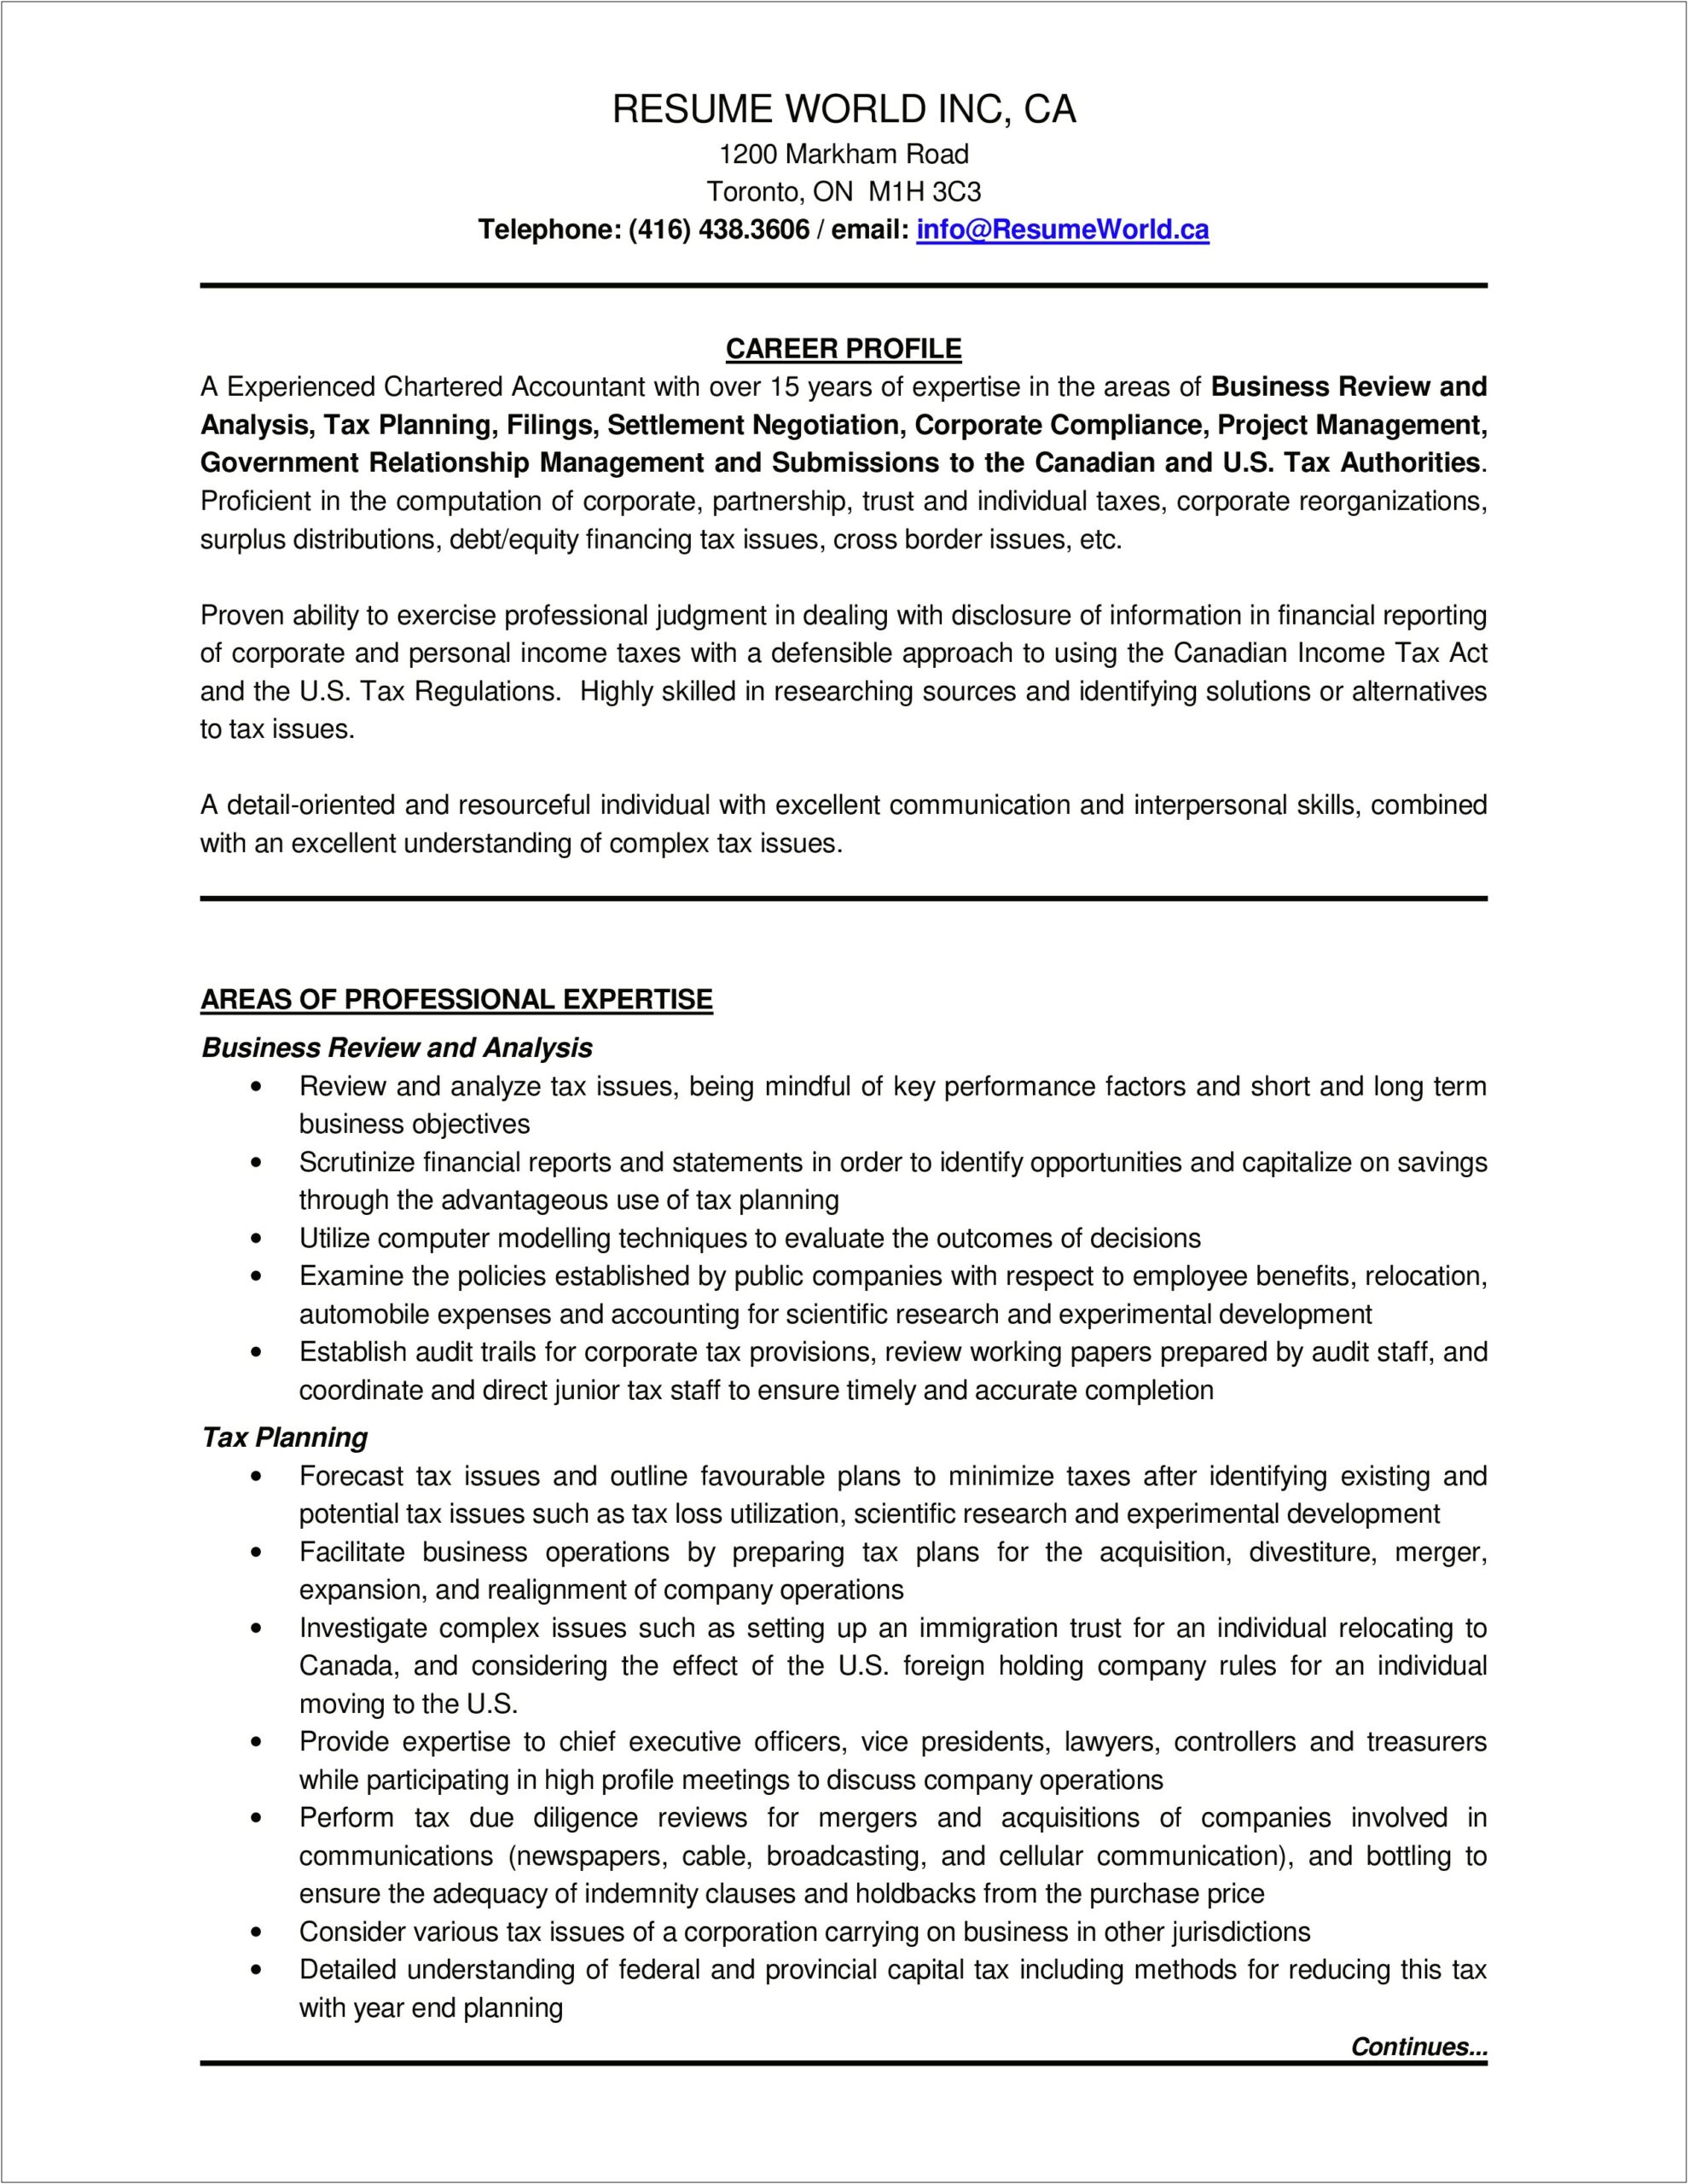 Sample Resume For Experienced Chartered Accountant